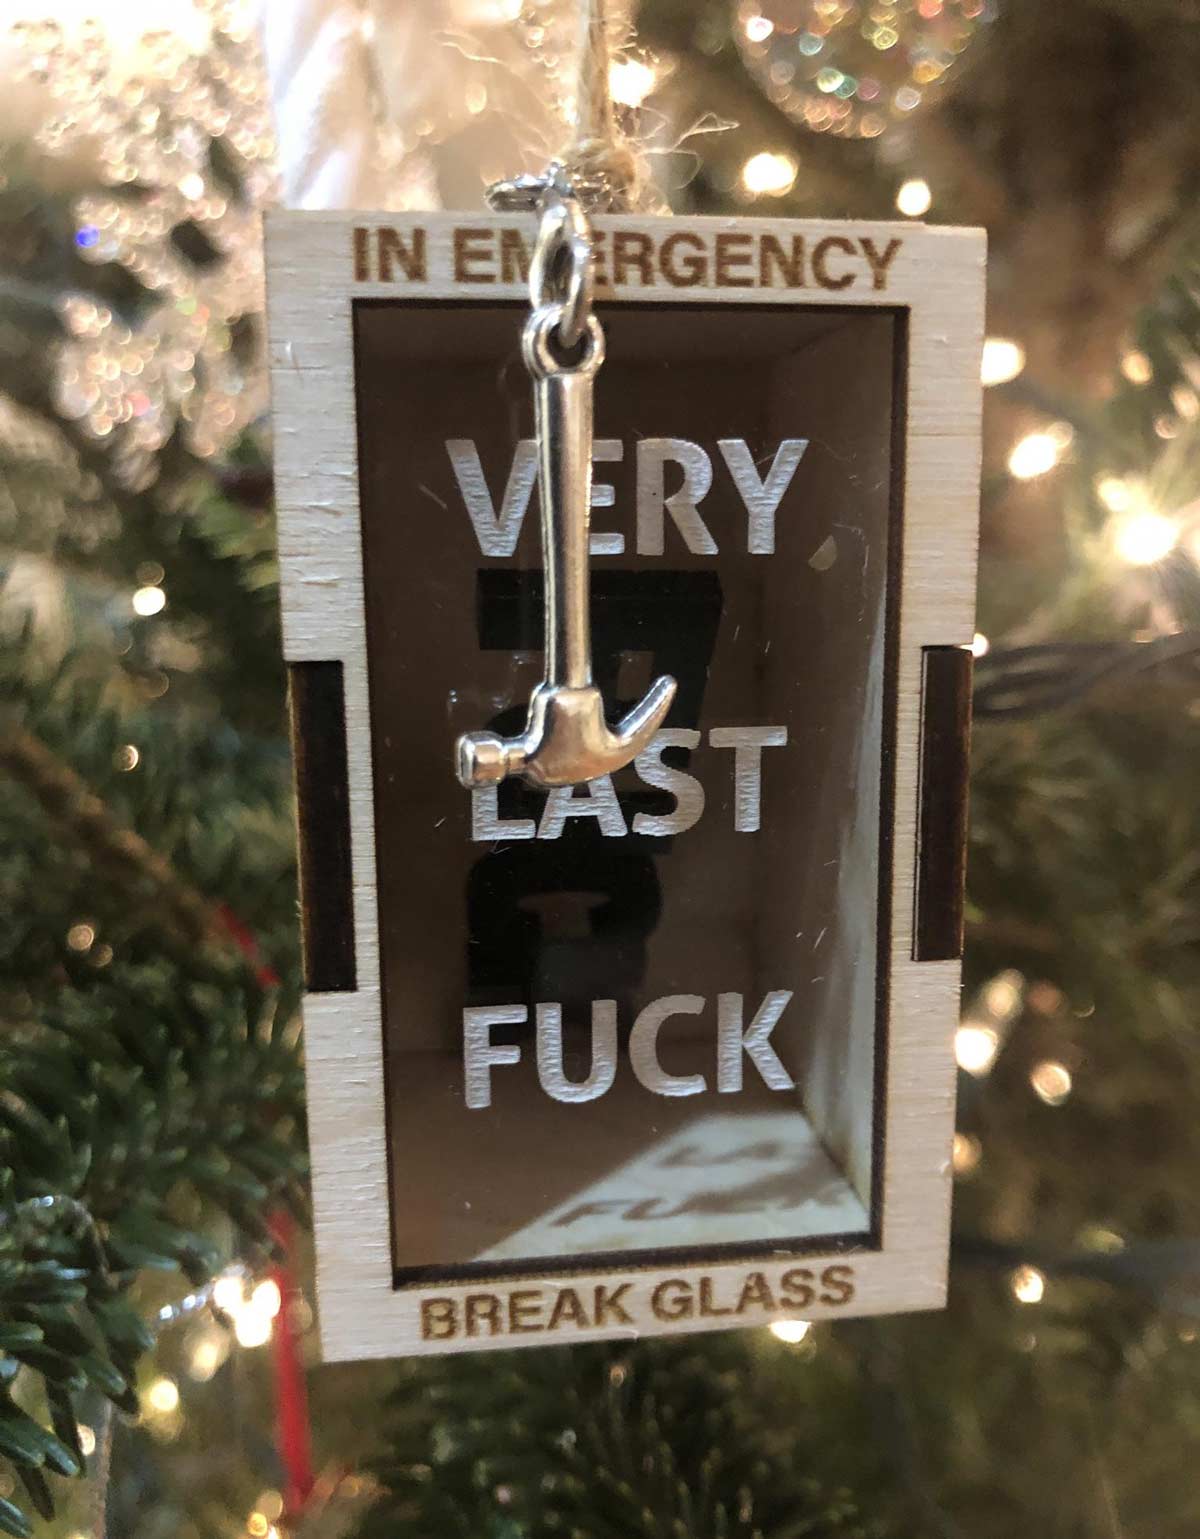 One of my mom’s ornaments